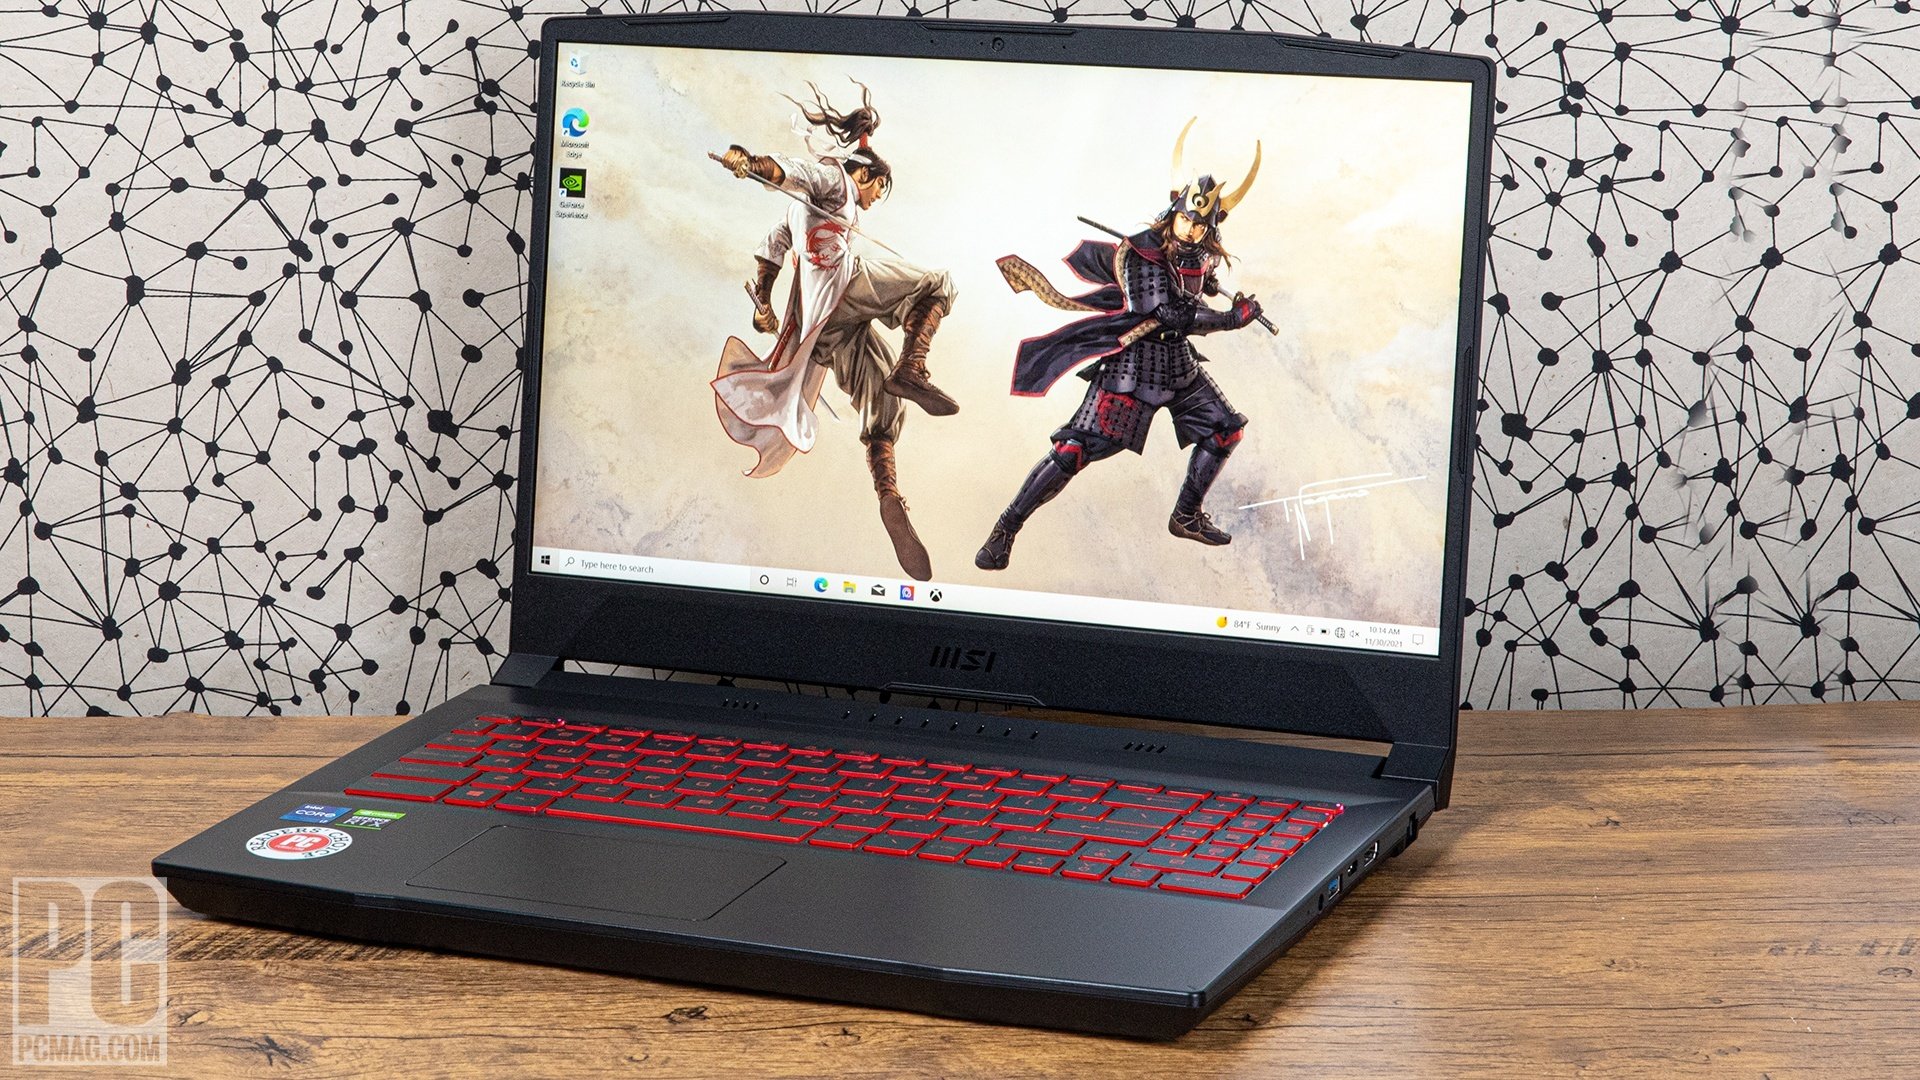 Where Can I Sell My 1 Year Old Gaming Laptop